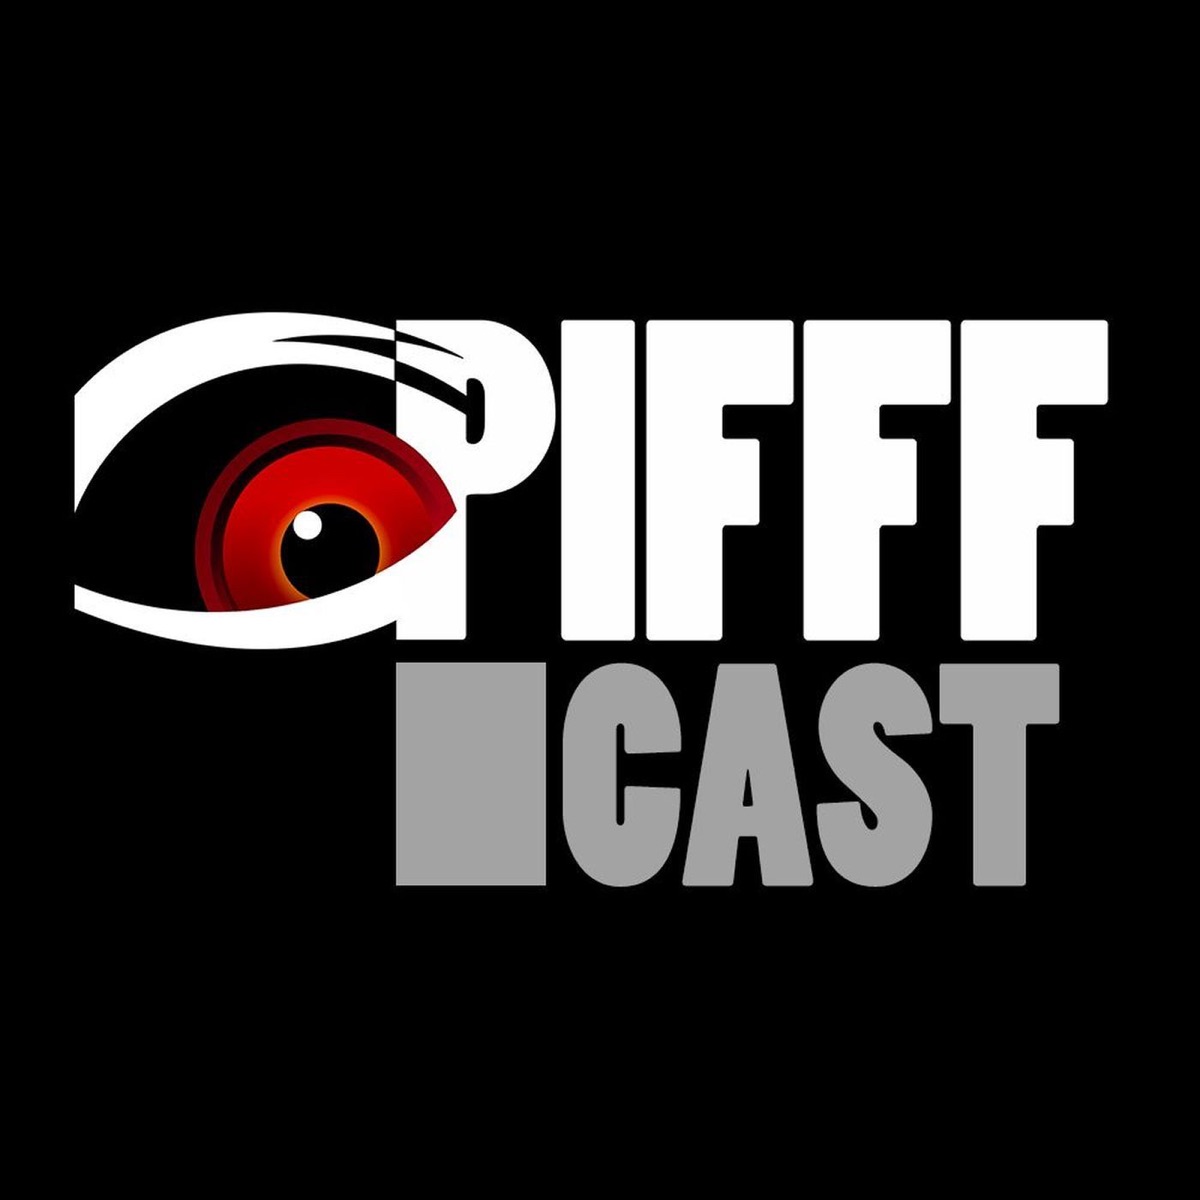 PIFFFcast image